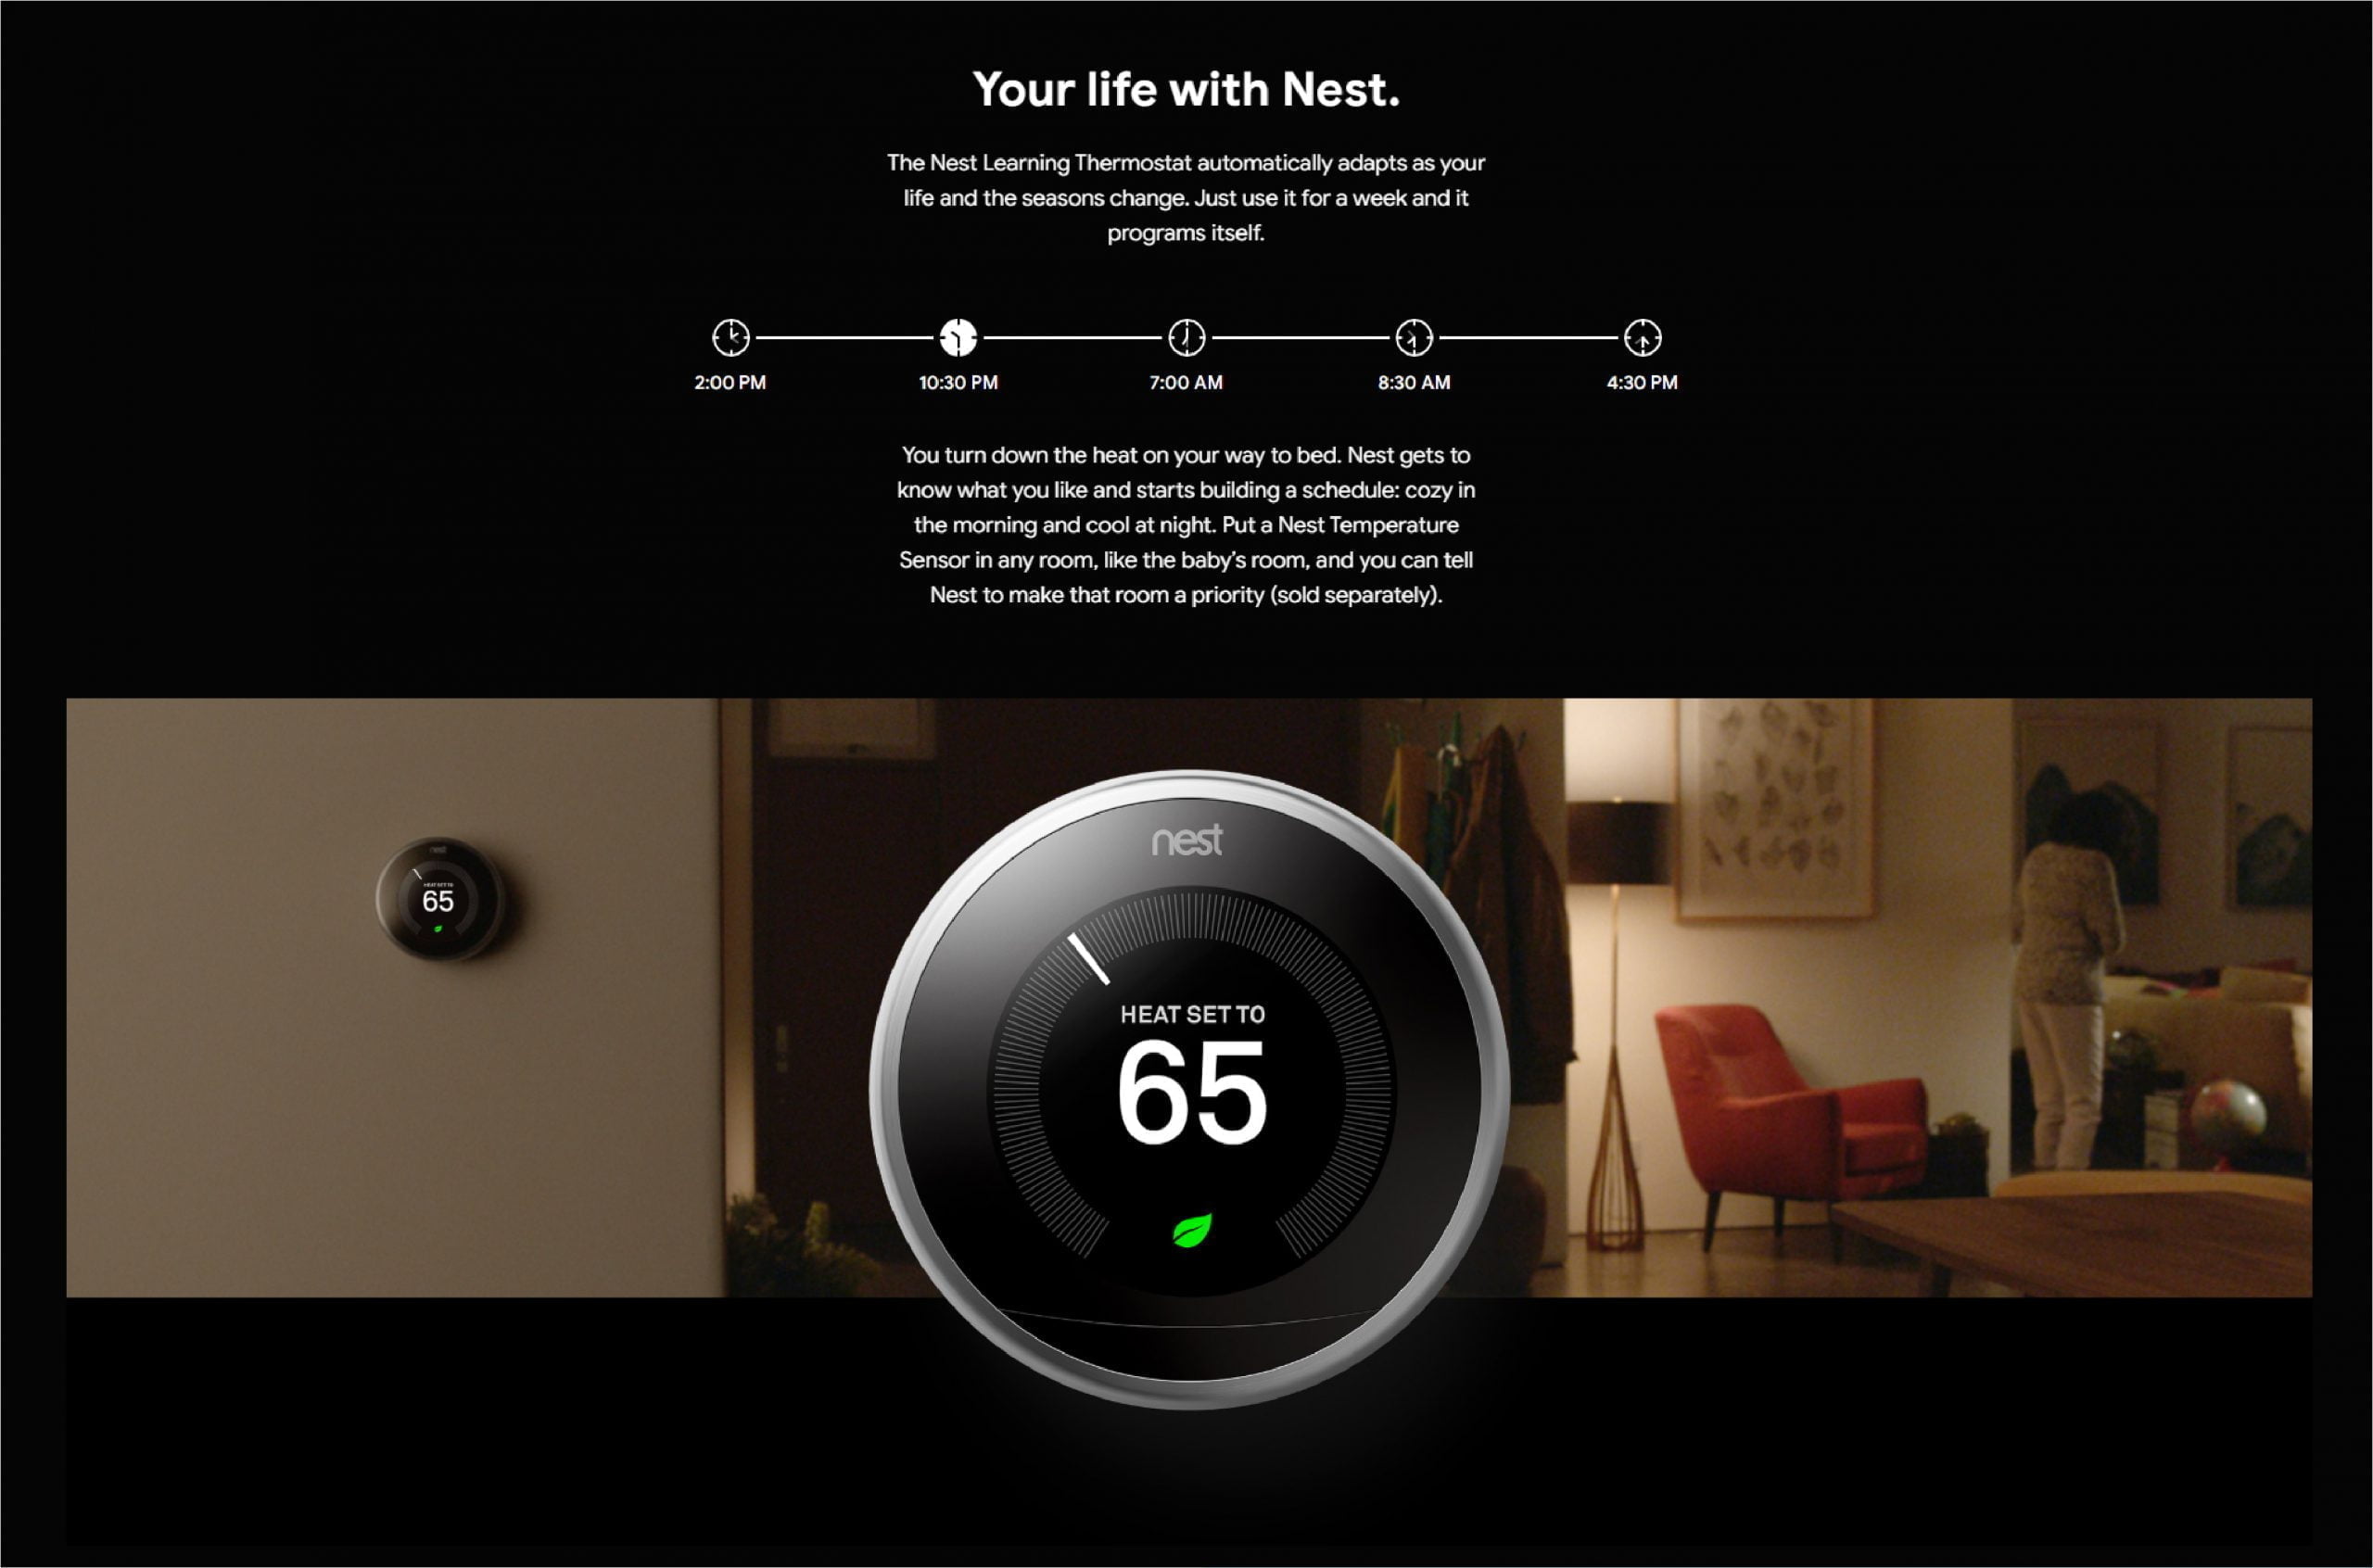 Nest 03 Scaled Google &Lt;H1&Gt;Google Nest Learning Smart Wifi Thermostat 3Rd Gen - Matt Black T3016Us&Lt;/H1&Gt; &Lt;Ul Class=&Quot;A-Unordered-List A-Vertical A-Spacing-Mini&Quot;&Gt; &Lt;Li&Gt;&Lt;Span Class=&Quot;A-List-Item&Quot;&Gt;Auto-Schedule: No More Confusing Programming. It Learns The Temperatures You Like And Programs Itself.&Lt;/Span&Gt;&Lt;/Li&Gt; &Lt;Li&Gt;&Lt;Span Class=&Quot;A-List-Item&Quot;&Gt;Wi-Fi Thermostat: Connect The Nest Thermostat To Wi-Fi To Change The Temperature From Your Phone, Tablet Or Laptop.&Lt;/Span&Gt;&Lt;/Li&Gt; &Lt;Li&Gt;&Lt;Span Class=&Quot;A-List-Item&Quot;&Gt;Energy Saving: You’ll See The Nest Leaf When You Choose A Temperature That Saves Energy. It Guides You In The Right Direction.&Lt;/Span&Gt;&Lt;/Li&Gt; &Lt;Li&Gt;&Lt;Span Class=&Quot;A-List-Item&Quot;&Gt;Smart Thermostat: Early-On Nest Learns How Your Home Warms Up And Keeps An Eye On The Weather To Get You The Temperature You Want When You Want It.&Lt;/Span&Gt;&Lt;/Li&Gt; &Lt;Li&Gt;&Lt;Span Class=&Quot;A-List-Item&Quot;&Gt;Home/Away Assist: The Nest Thermostat Automatically Turns Itself Down When You’re Away To Avoid Heating Or Cooling An Empty Home.&Lt;/Span&Gt;&Lt;/Li&Gt; &Lt;Li&Gt;&Lt;Span Class=&Quot;A-List-Item&Quot;&Gt;Works With Amazon Alexa For Voice Control (Alexa Device Sold Separately)&Lt;/Span&Gt;&Lt;/Li&Gt; &Lt;Li&Gt;&Lt;Span Class=&Quot;A-List-Item&Quot;&Gt;Auto-Schedule: Nest Learns The Temperatures You Like And Programs Itself In About A Week.&Lt;/Span&Gt;&Lt;/Li&Gt; &Lt;/Ul&Gt; &Lt;H5&Gt;Note : Direct Replacement Warranty One Year&Lt;/H5&Gt; &Lt;Div Class=&Quot;Html-Fragment&Quot;&Gt; &Lt;Div&Gt; &Lt;B&Gt;We Also Provide International Wholesale And Retail Shipping To All Gcc Countries: Saudi Arabia, Qatar, Oman, Kuwait, Bahrain.&Lt;/B&Gt; &Lt;/Div&Gt; &Lt;/Div&Gt; &Lt;Div Class=&Quot;A-Row A-Expander-Container A-Expander-Inline-Container&Quot; Aria-Live=&Quot;Polite&Quot;&Gt; &Lt;Div Class=&Quot;A-Expander-Content A-Expander-Extend-Content A-Expander-Content-Expanded&Quot; Aria-Expanded=&Quot;True&Quot;&Gt;&Lt;/Div&Gt; &Lt;/Div&Gt; Thermostat Google Nest Learning Smart Wifi Thermostat 3Rd Gen - Matt Black T3016Us